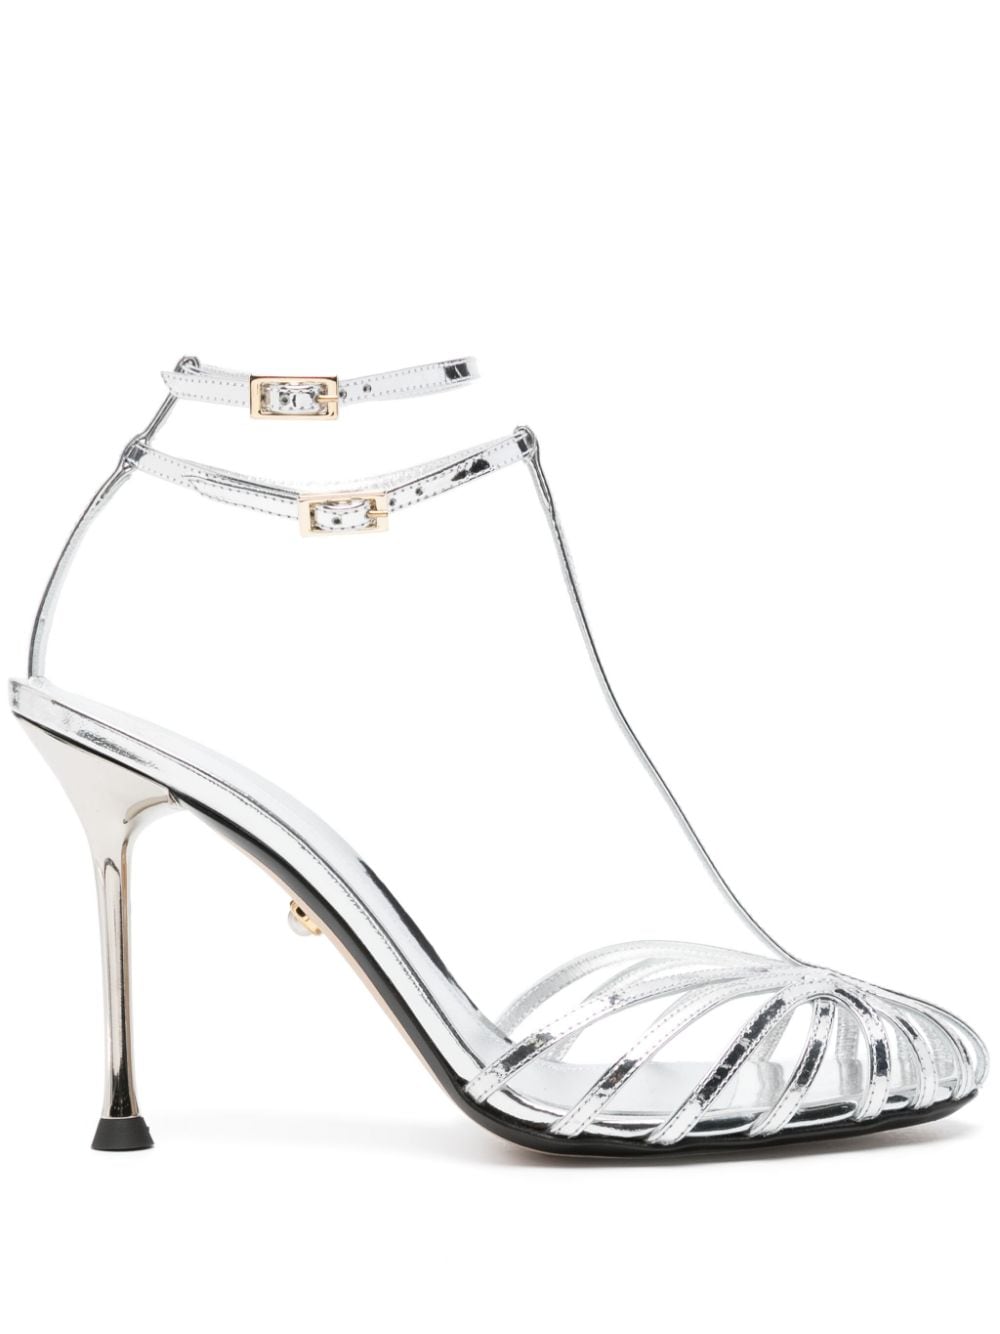 Image 1 of Alevì Anna leather sandals